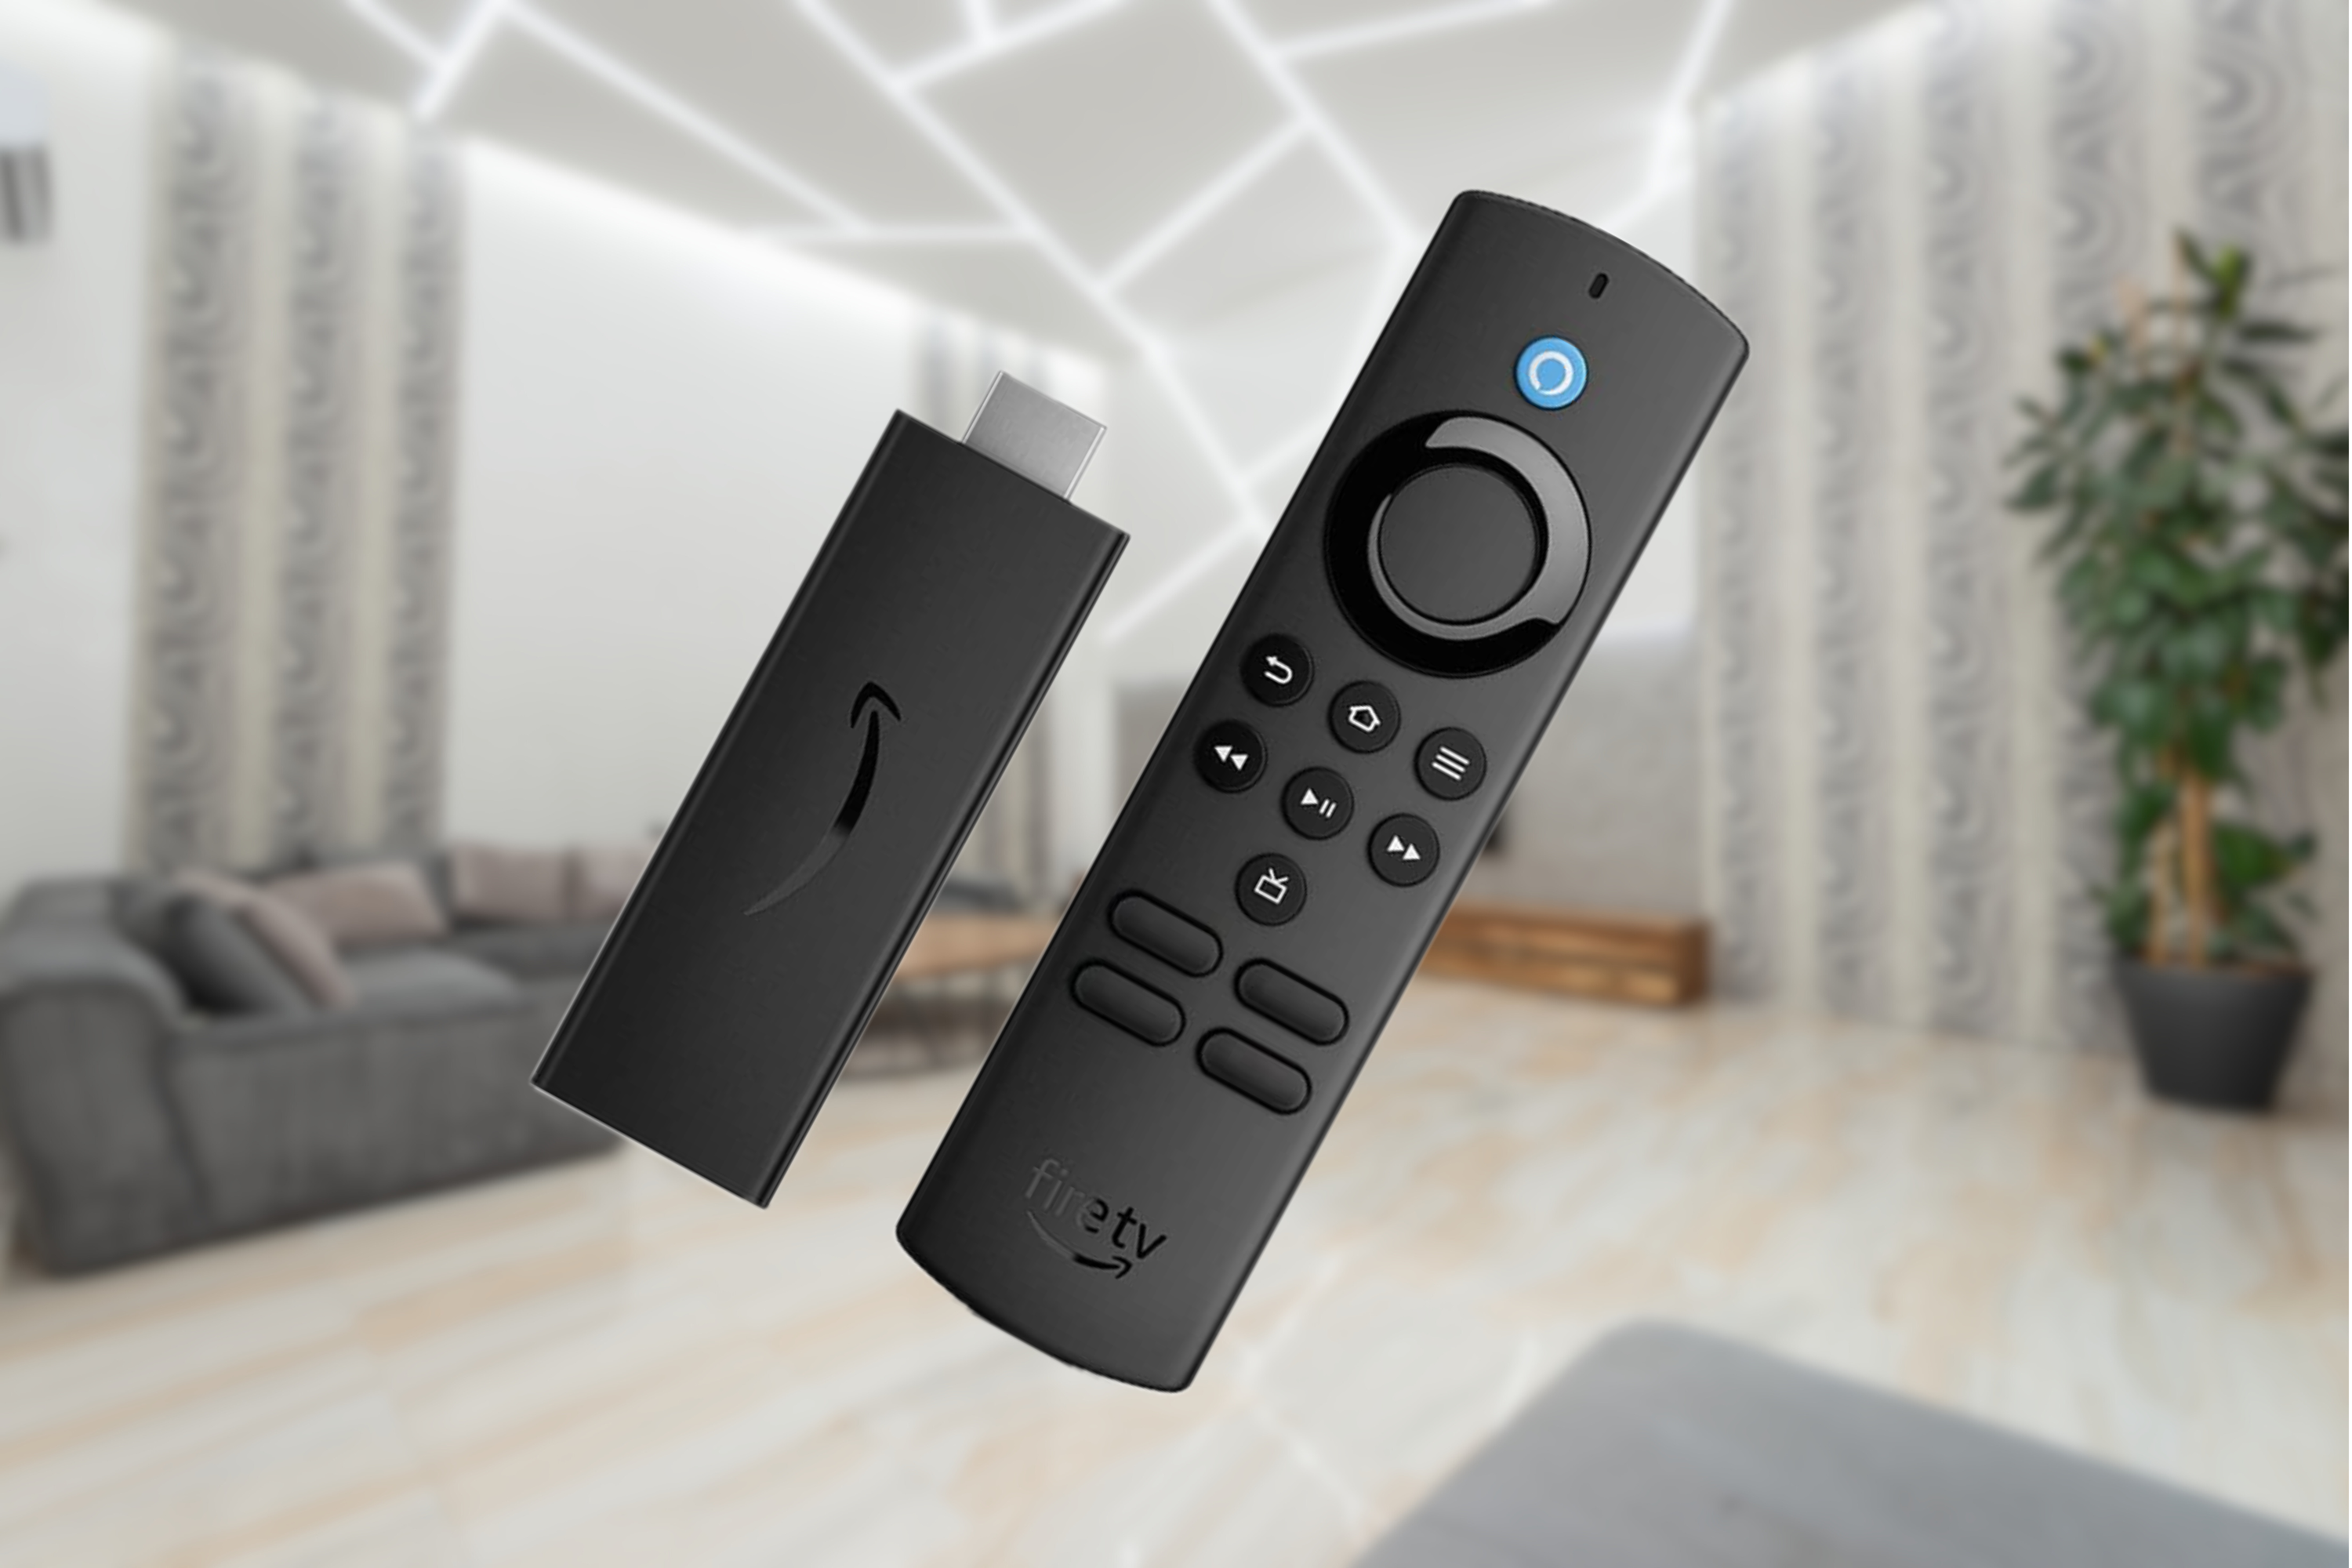 Amazon Fire TV Stick Lite in front of living room that's blurred